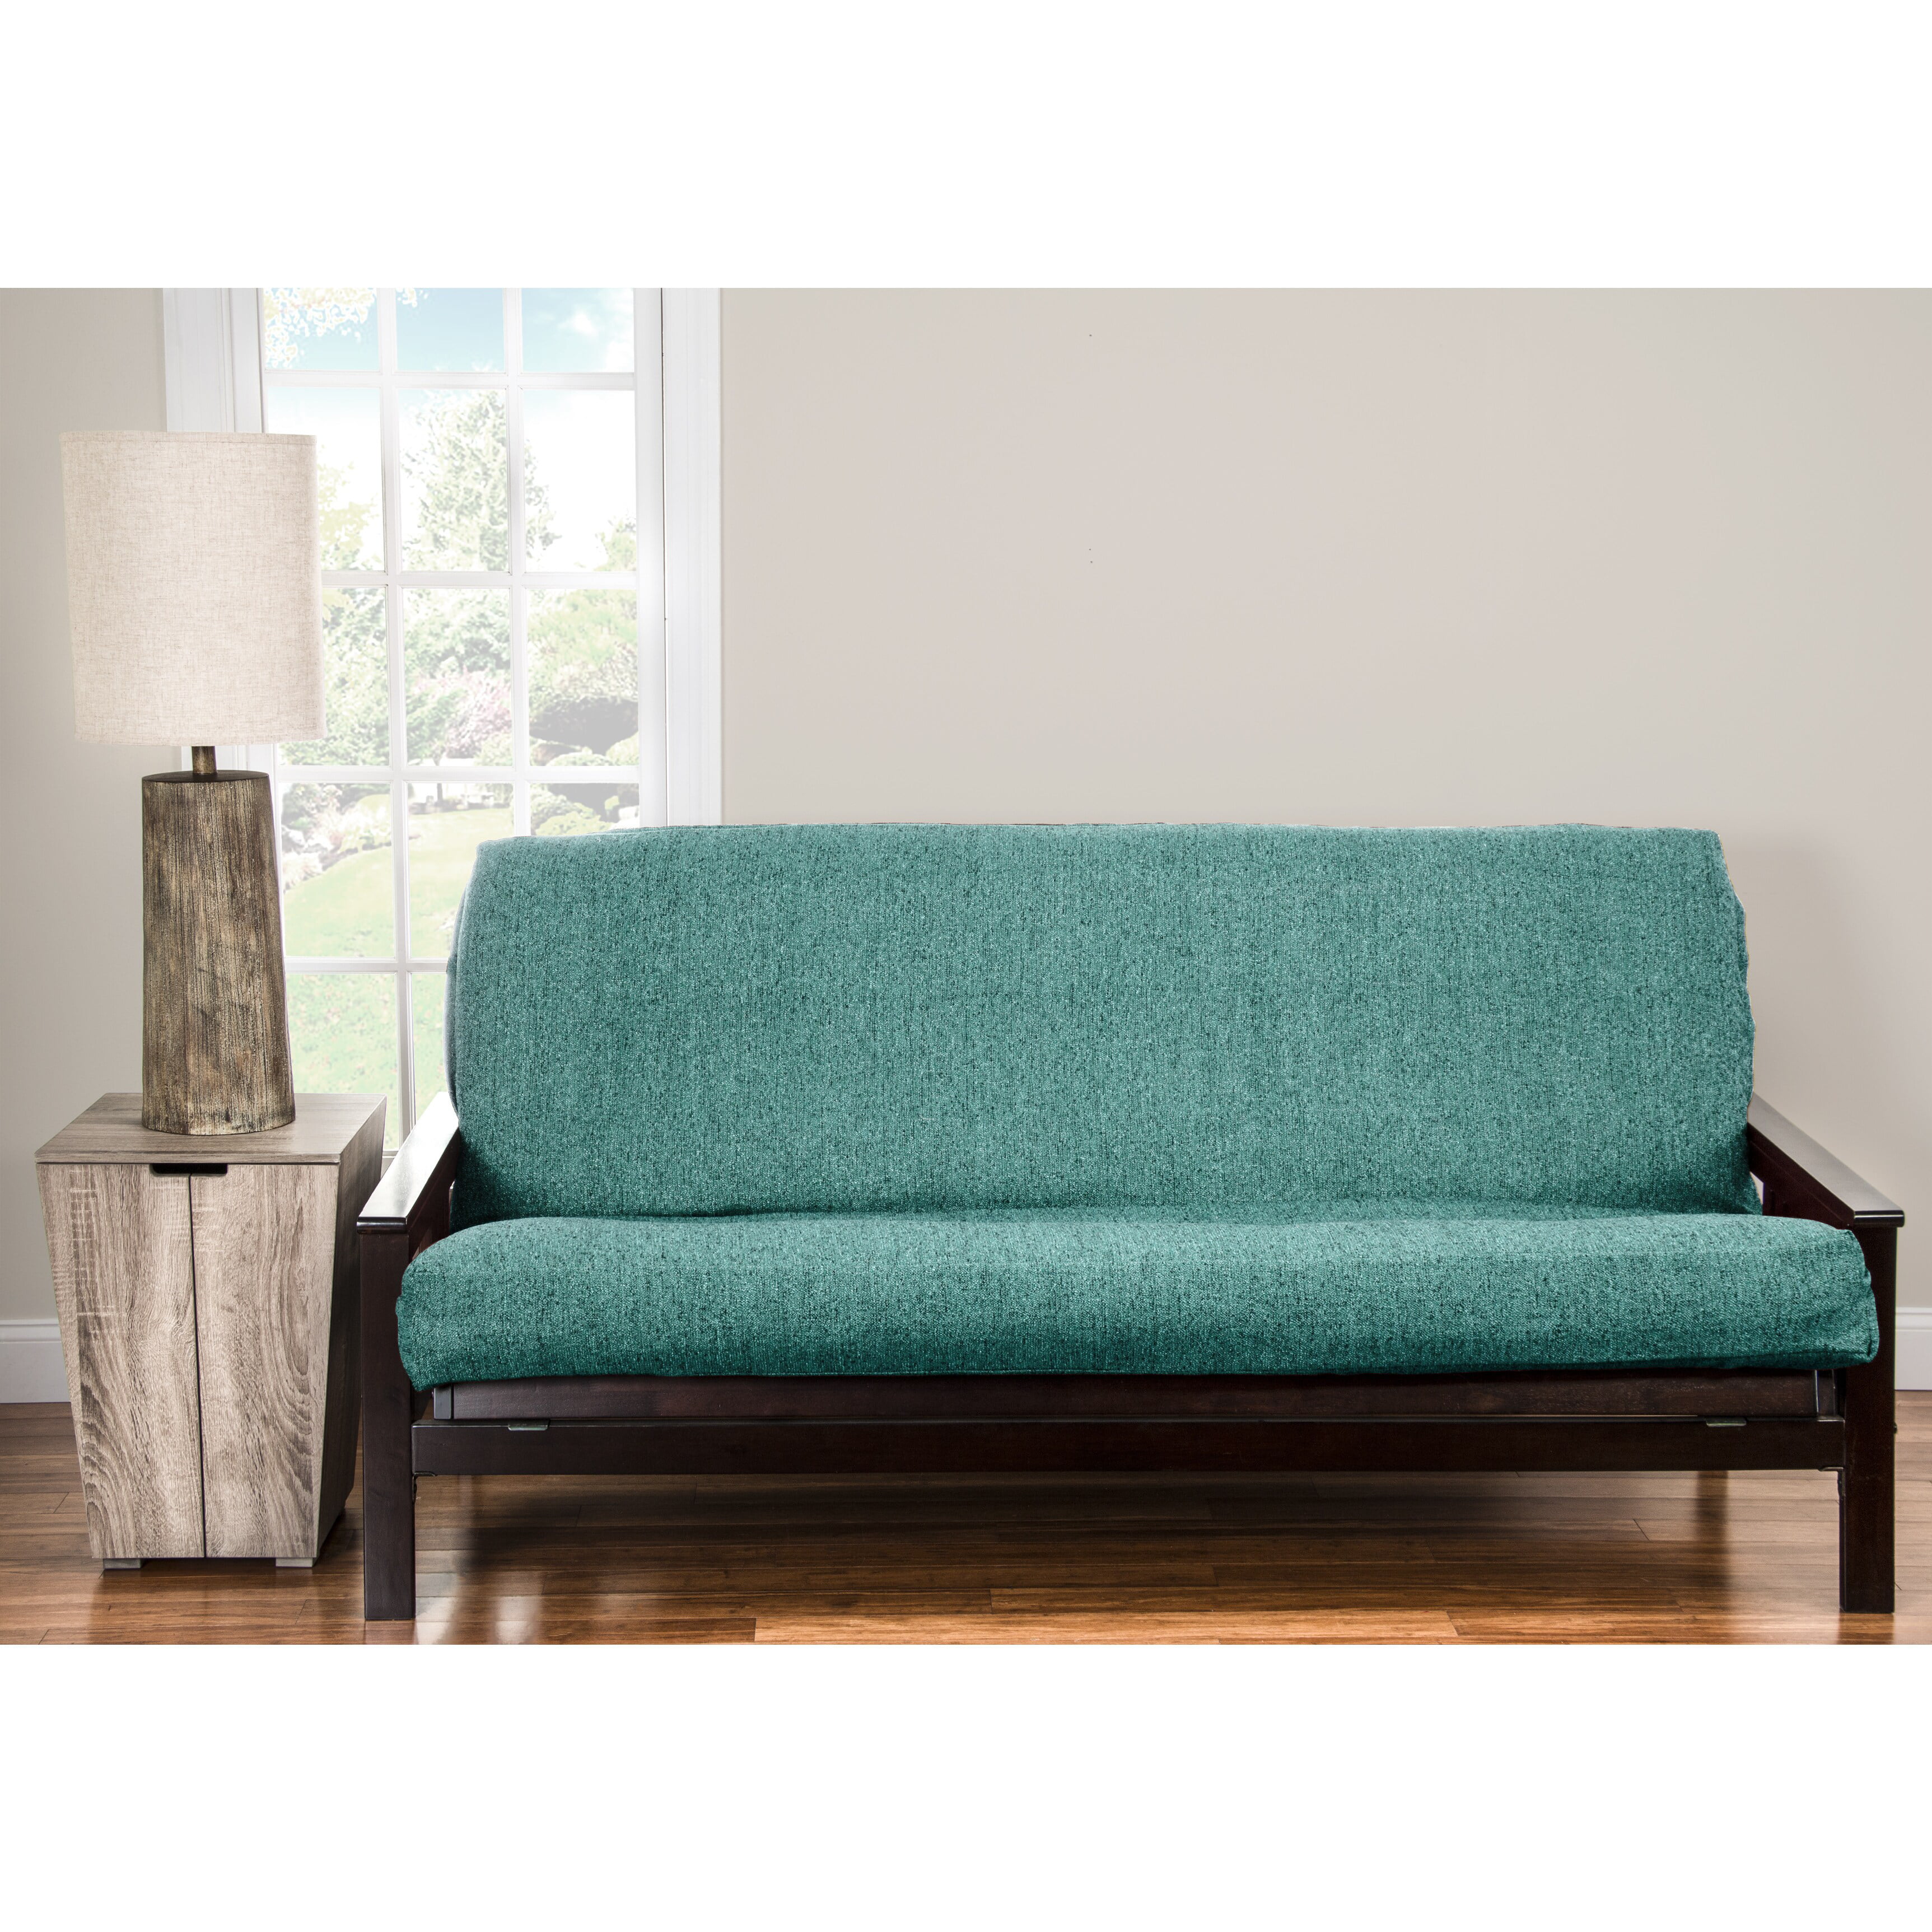 6x60x80 Queen Futon Mattress Covers , Turquoise